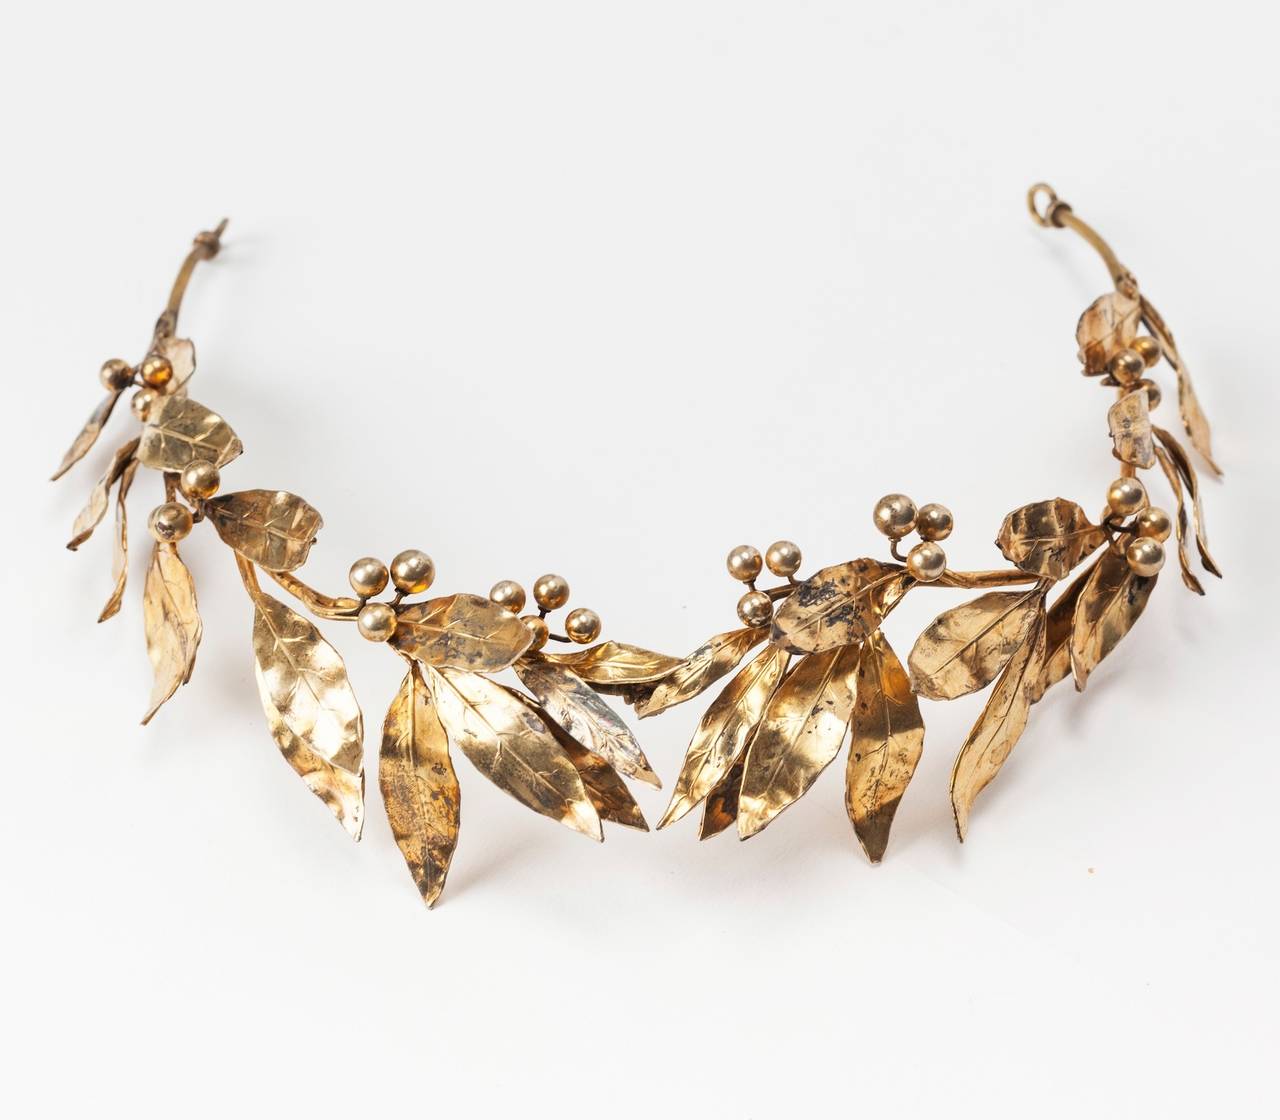 Late 19th Century diadem handmade in gilded silver of naturalistic laurel branches and berries. Designed to be tied with a silk ribbon hidden within hair. Exquisite craftsmanship and quality, perfect for a modern day bride.
Excellent condition,